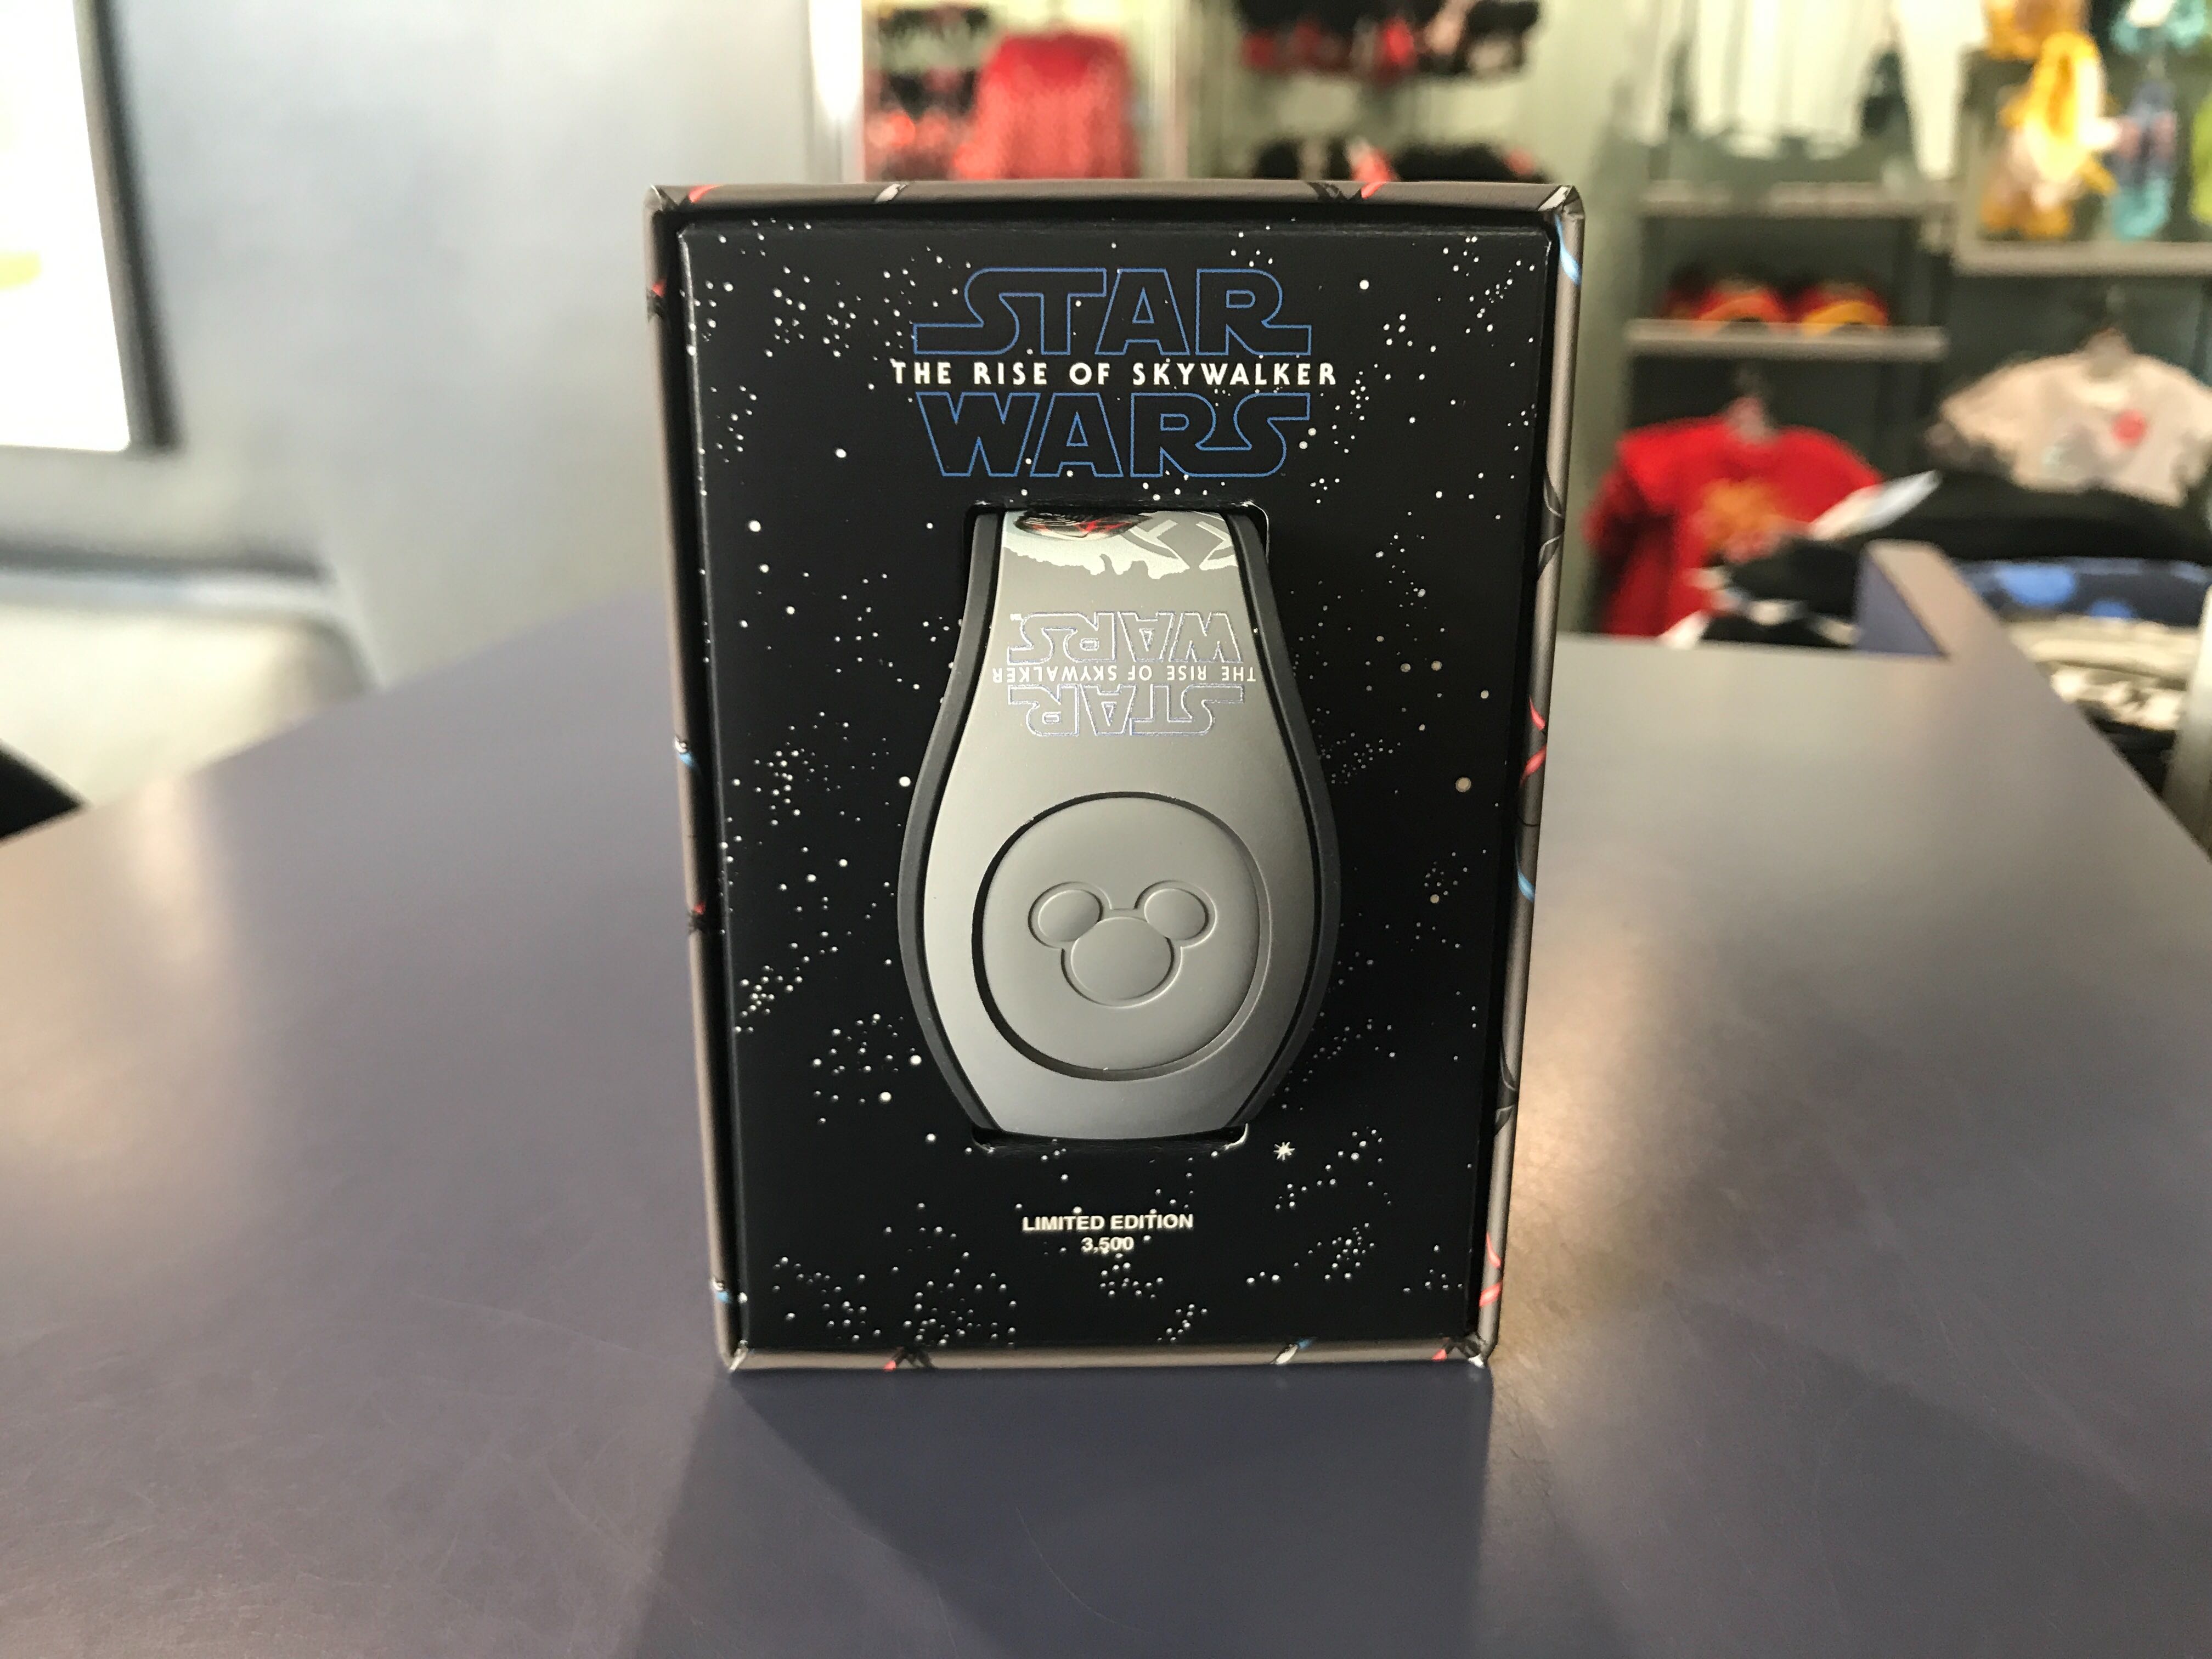 star wars rise of skywalker magicband 9